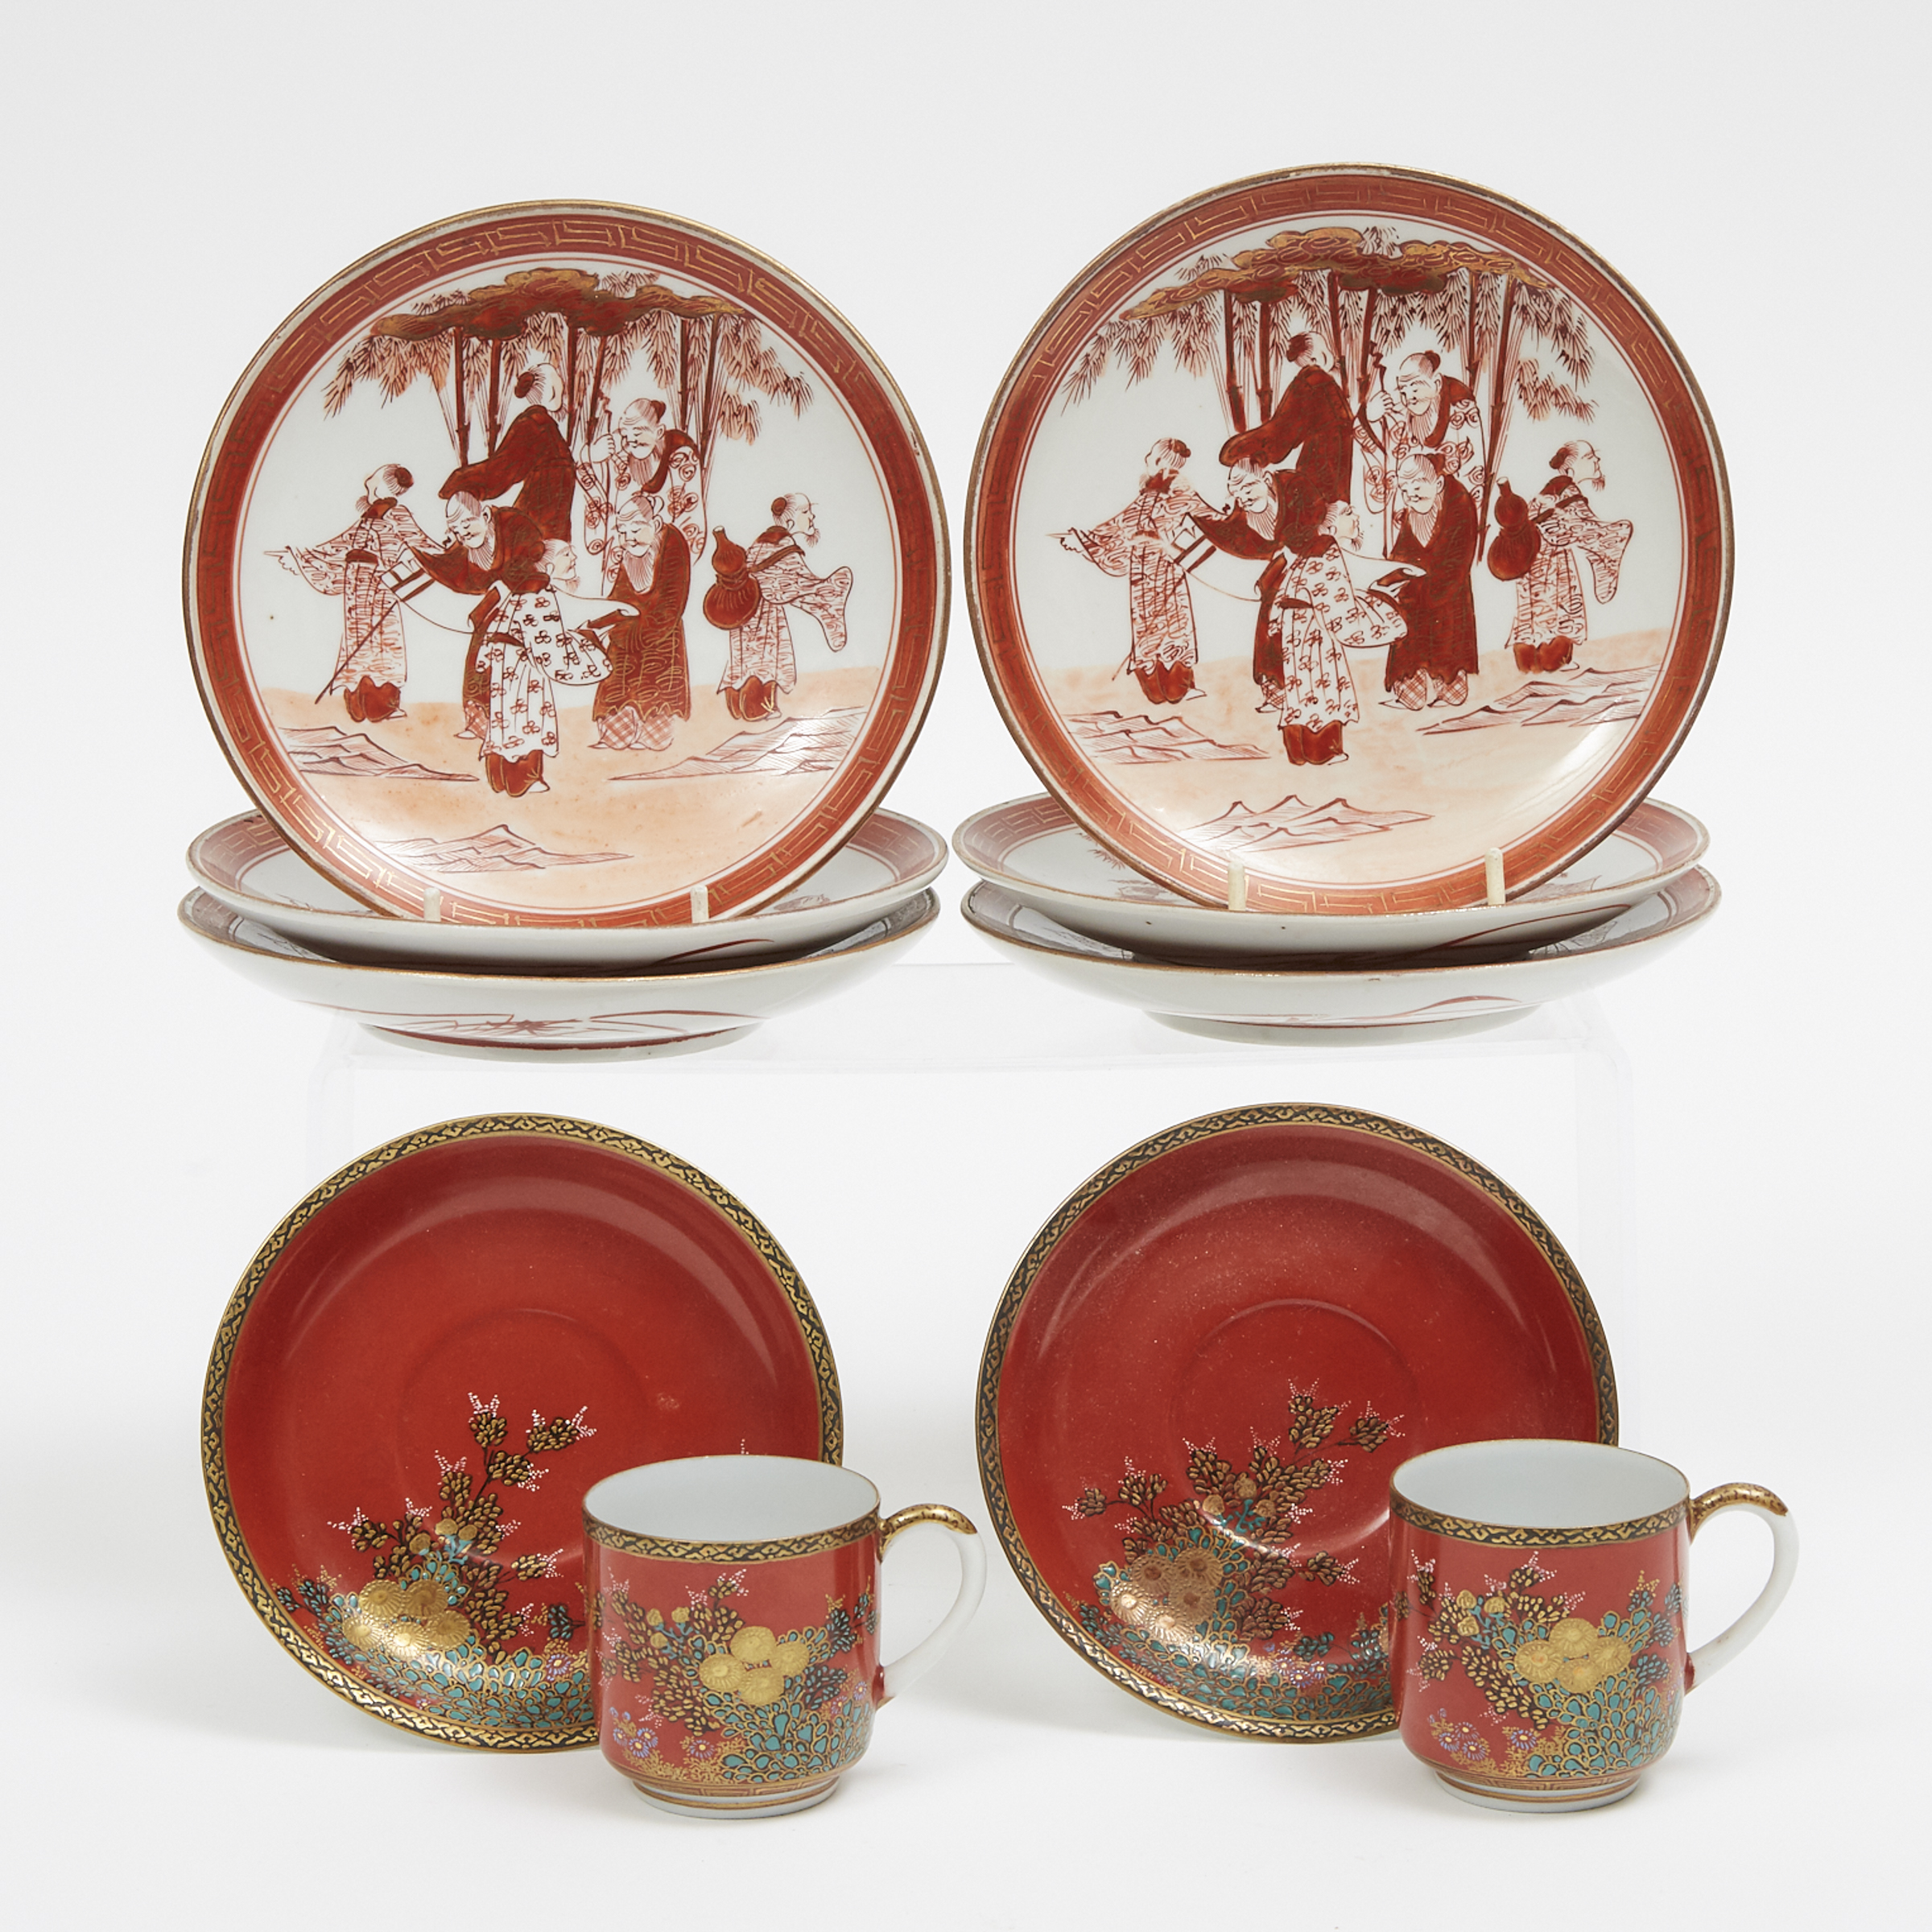 A Group of Ten Japanese Kutani and Porcelain Cups, Saucers, and Plates